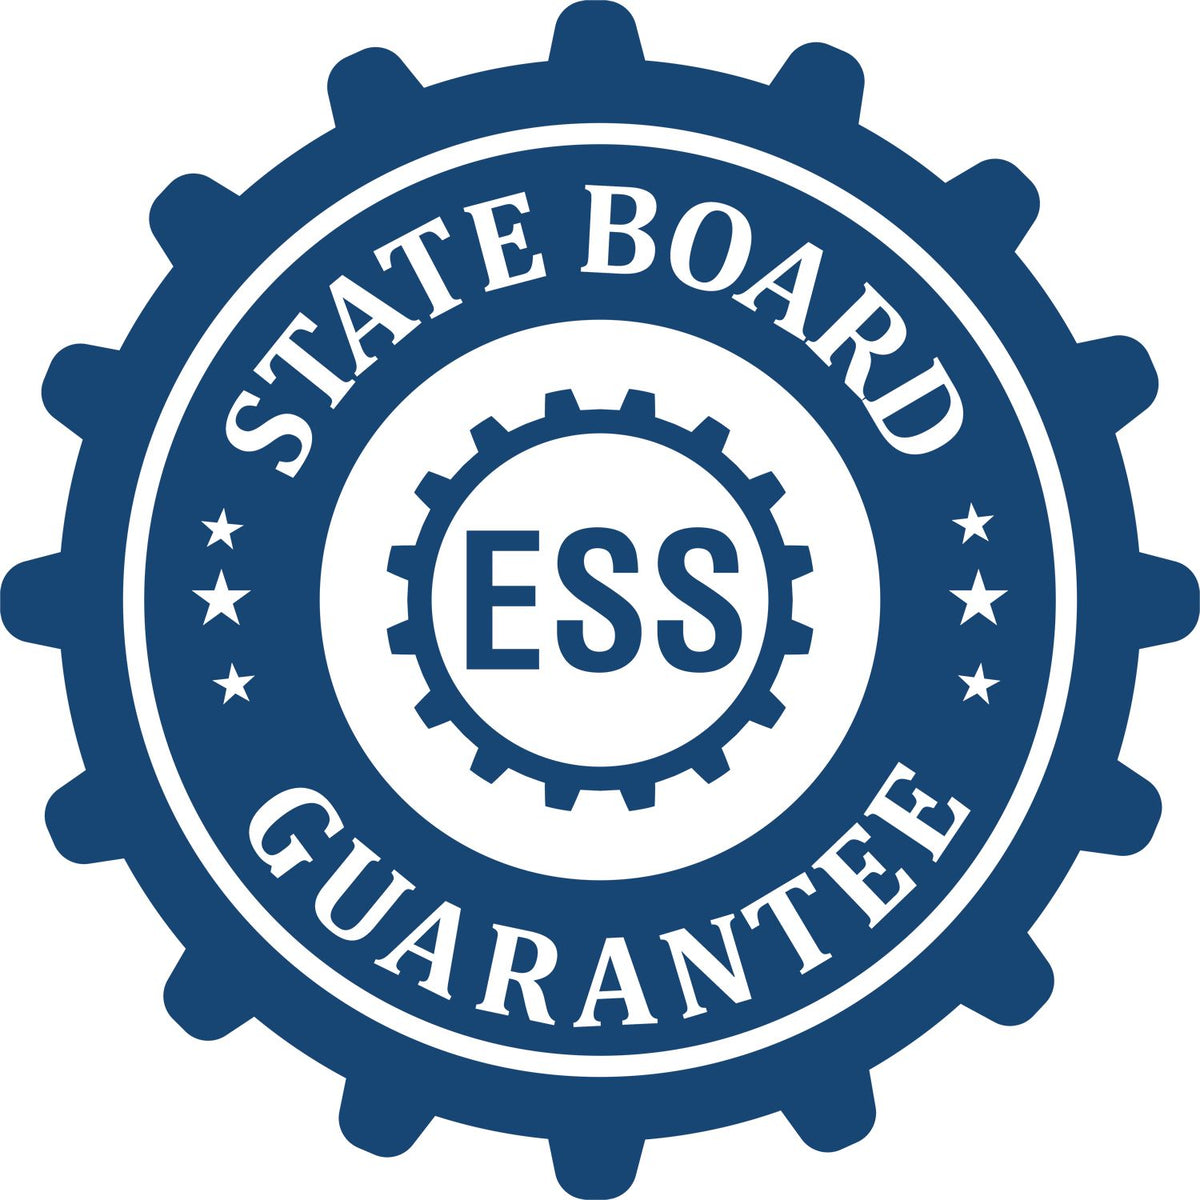 An emblem in a gear shape illustrating a state board guarantee for the Hybrid New Mexico Land Surveyor Seal